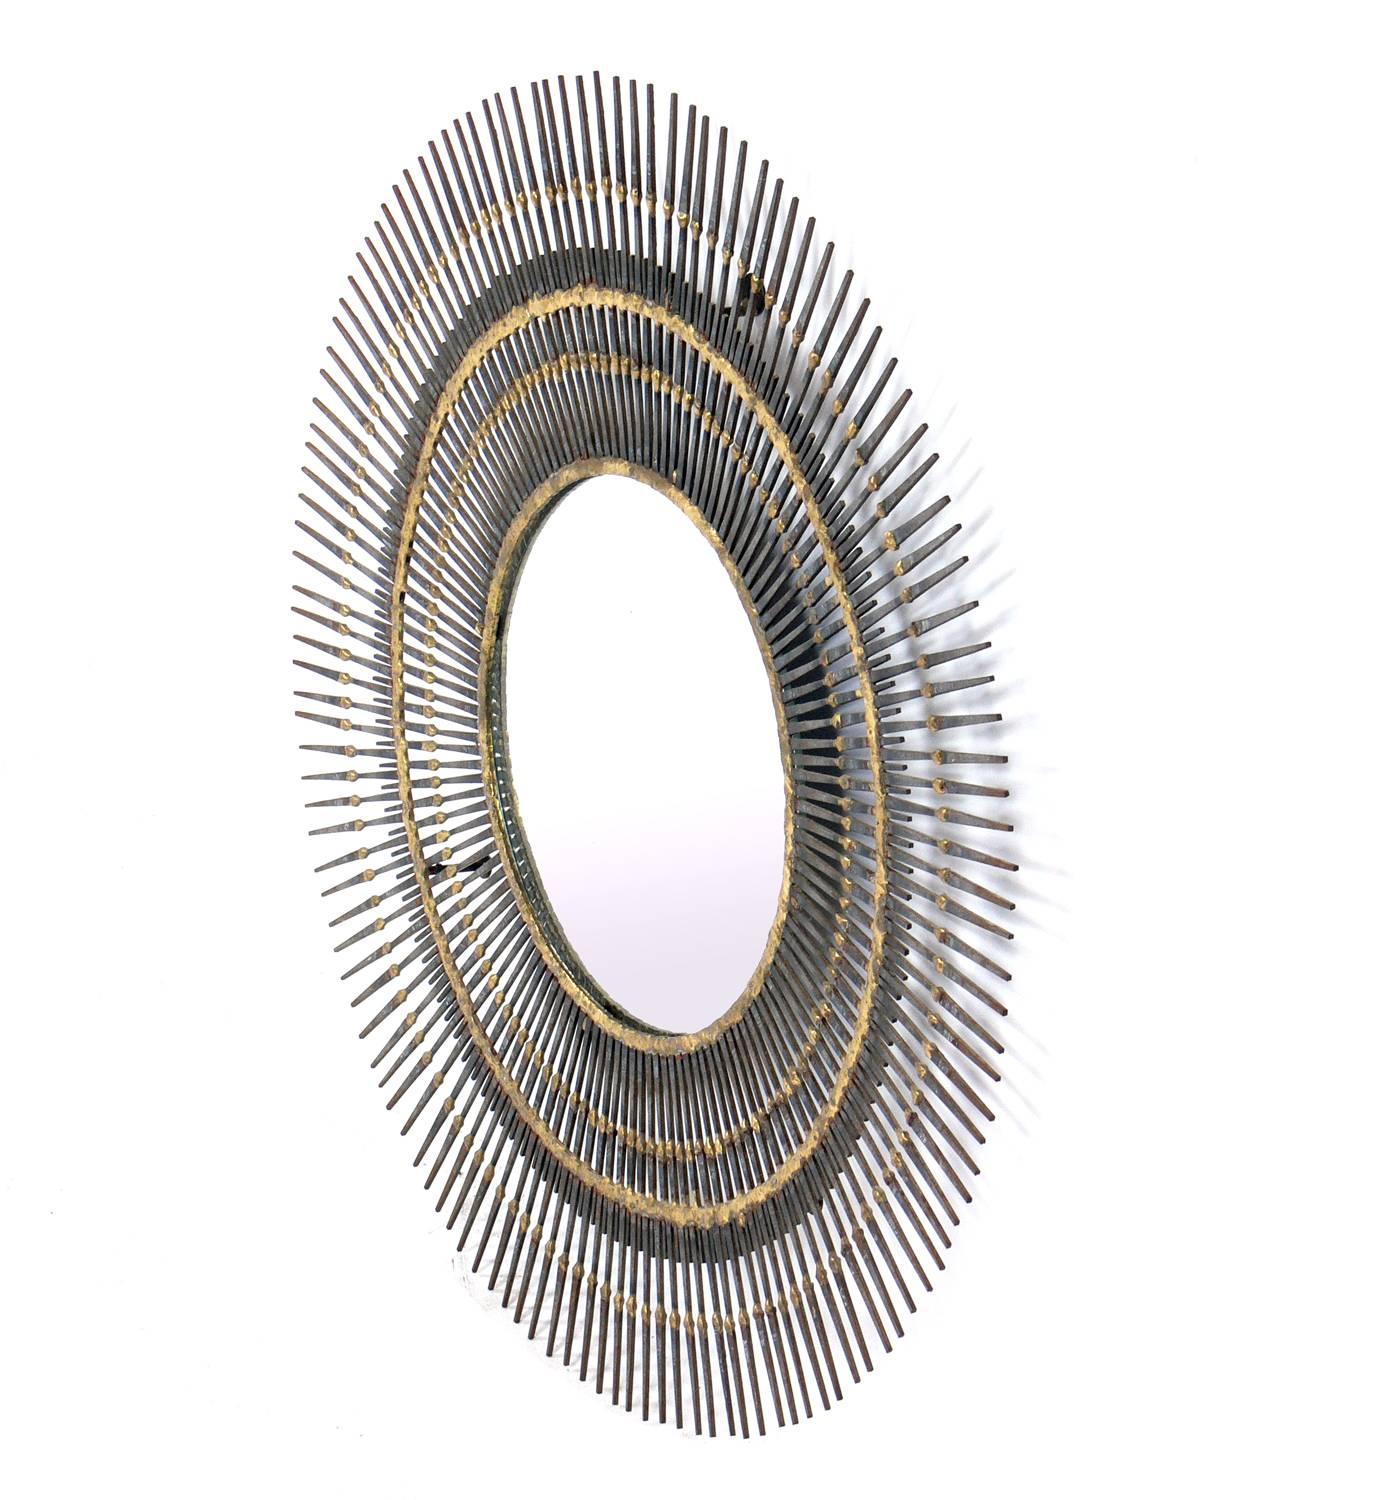 Sculptural sunburst nail mirror, American, circa 1960s. Handmade with welded patinated nails. Overall diameter is 24.5 inches, diameter of mirror is inches. Retains warm original patina. Original mounting brackets on reverse.